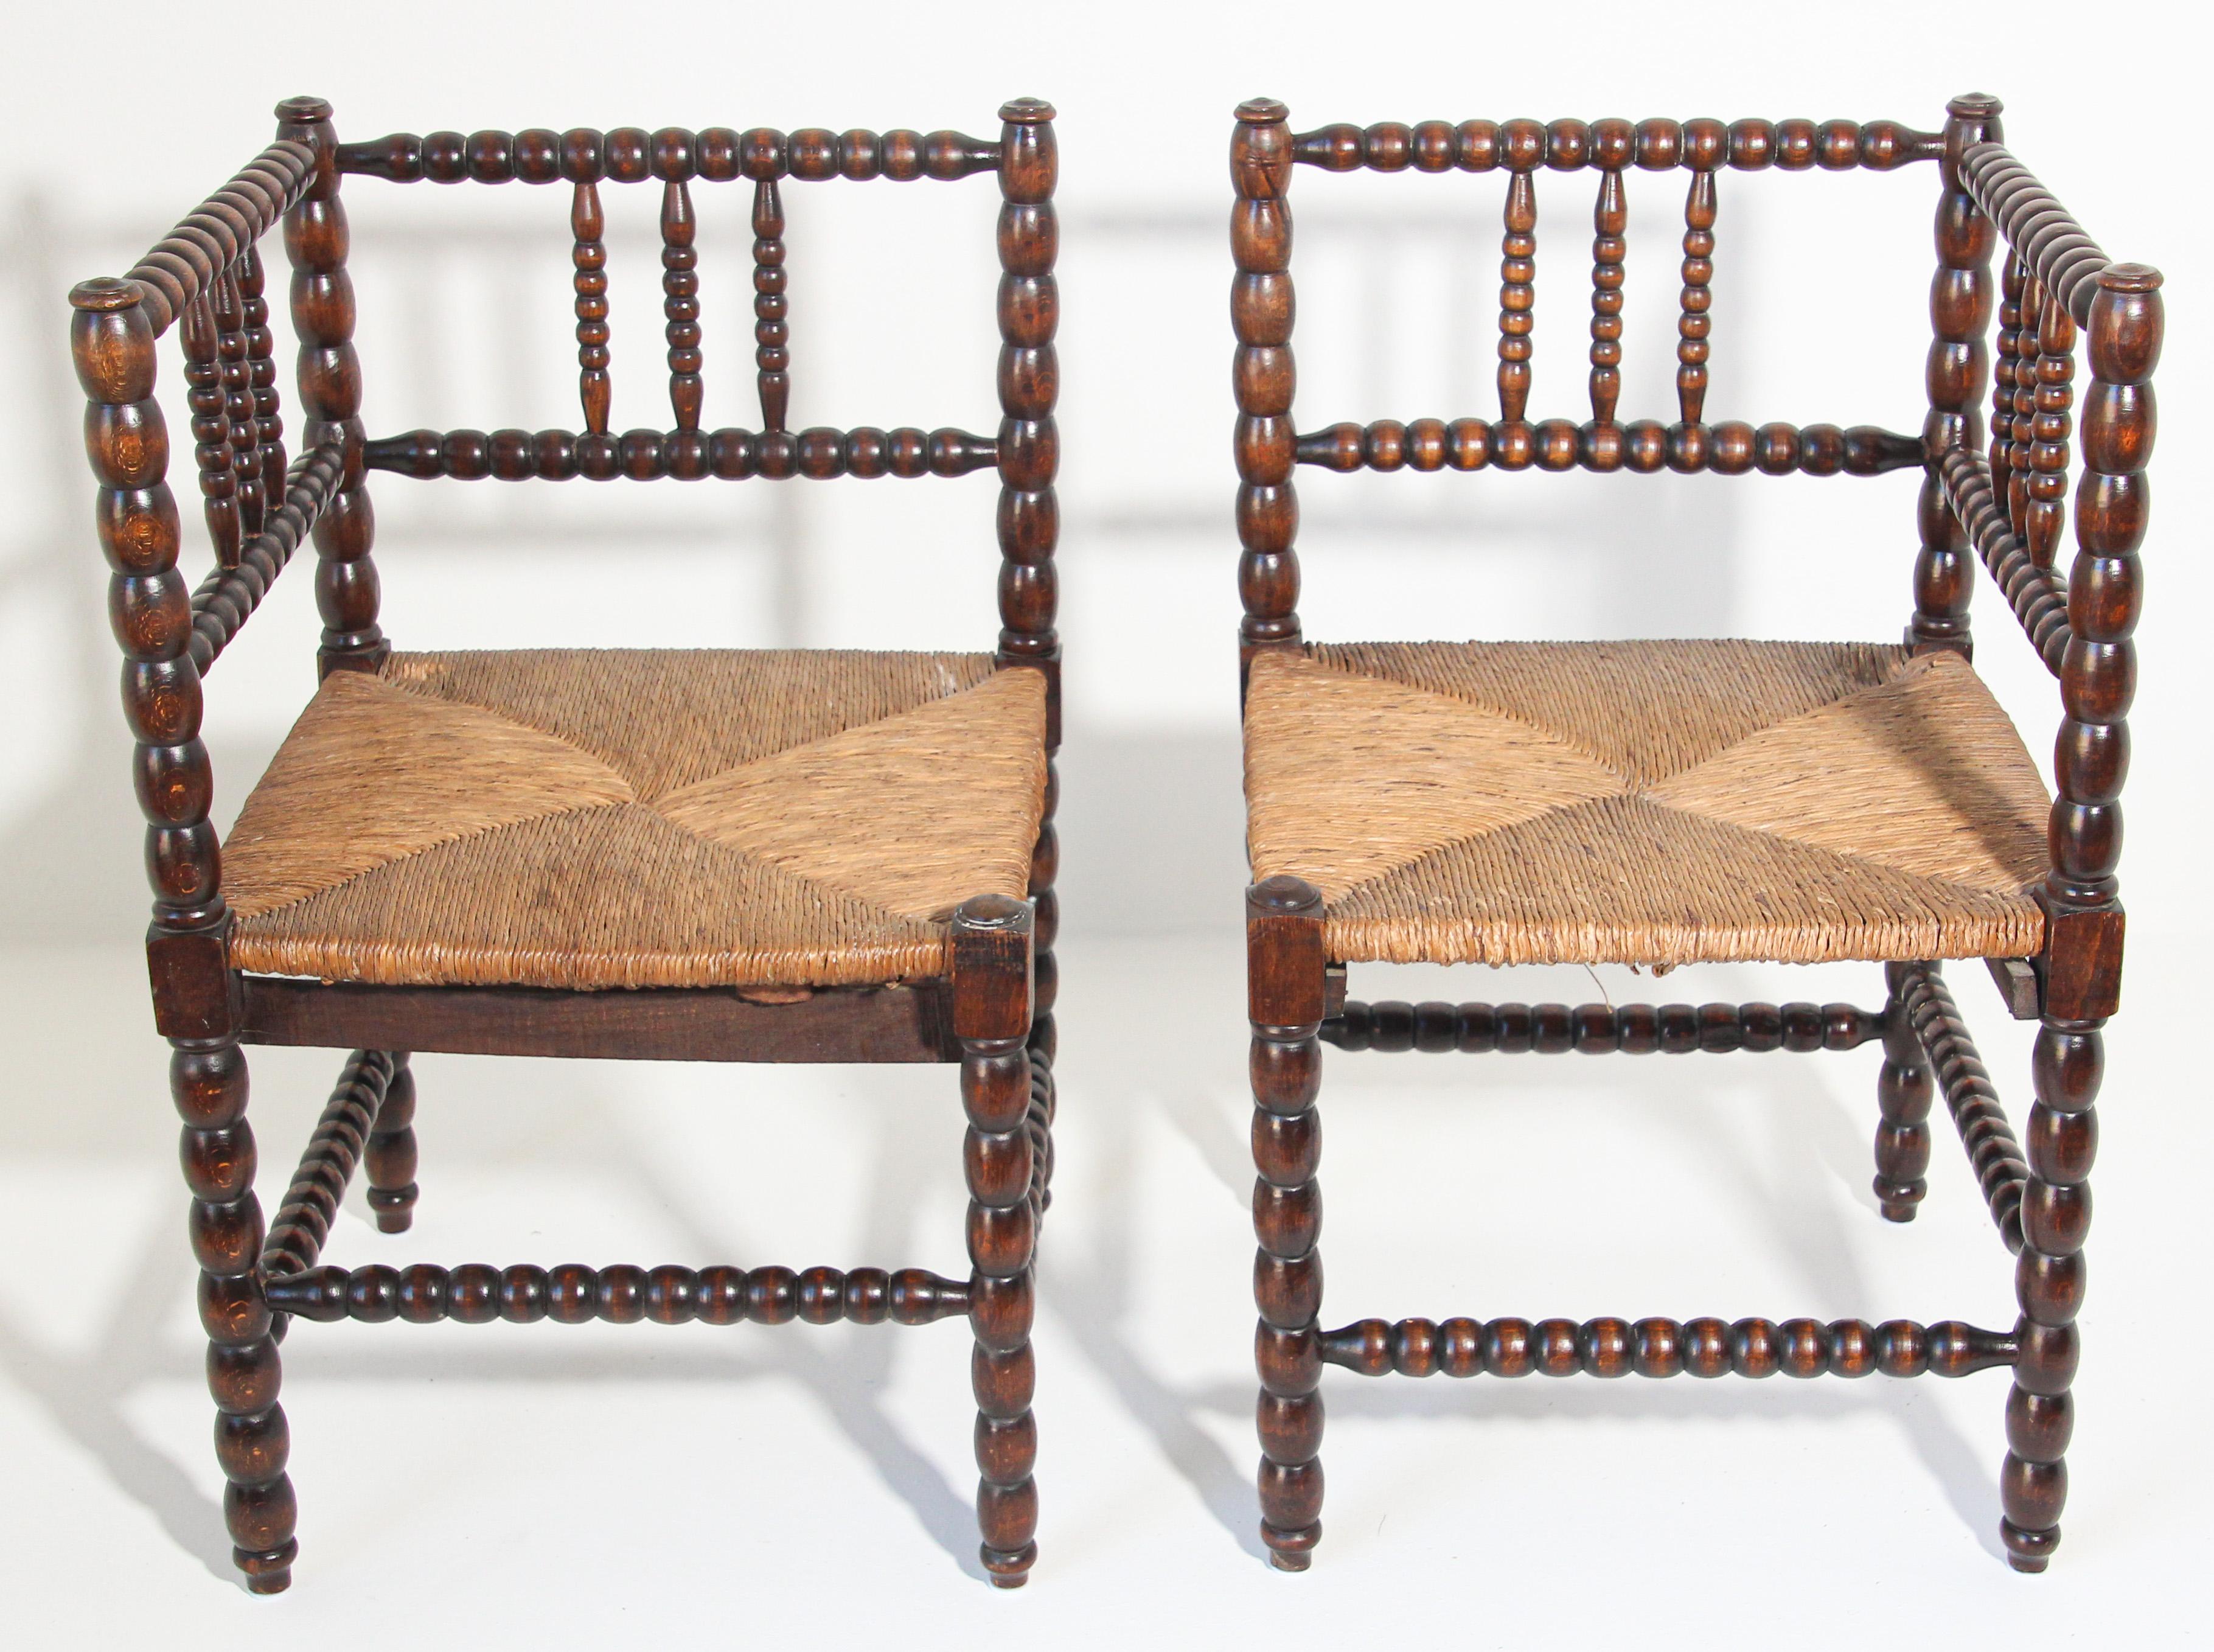 Pair of French rush-seat corner chairs, Coin du Feu.
19th Century French Provincial-style carved fruitwood armchairs with open backs and rush seats.
Pair of antique sturdy useable chair, wood stick and ball craftsmanship corner chair with original